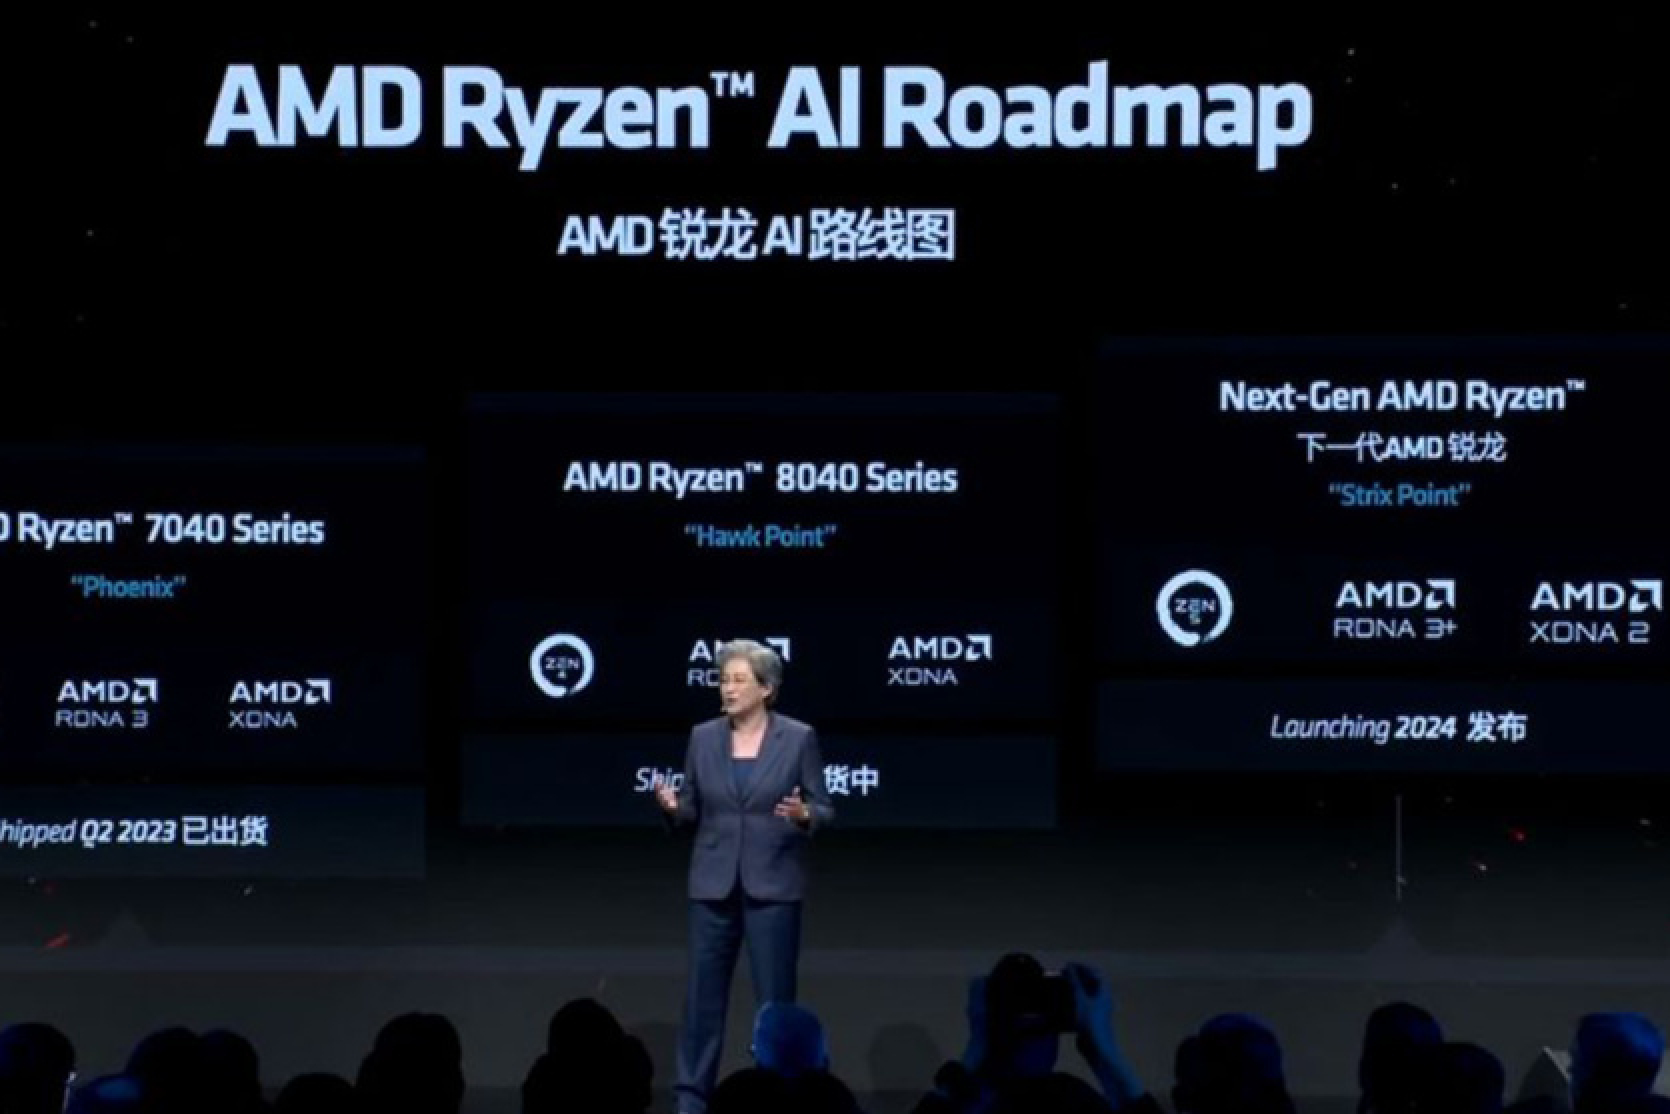 AMD talked about Strix Point processors: Zen 5, RDNA 3+ and XDNA 2 in 2024